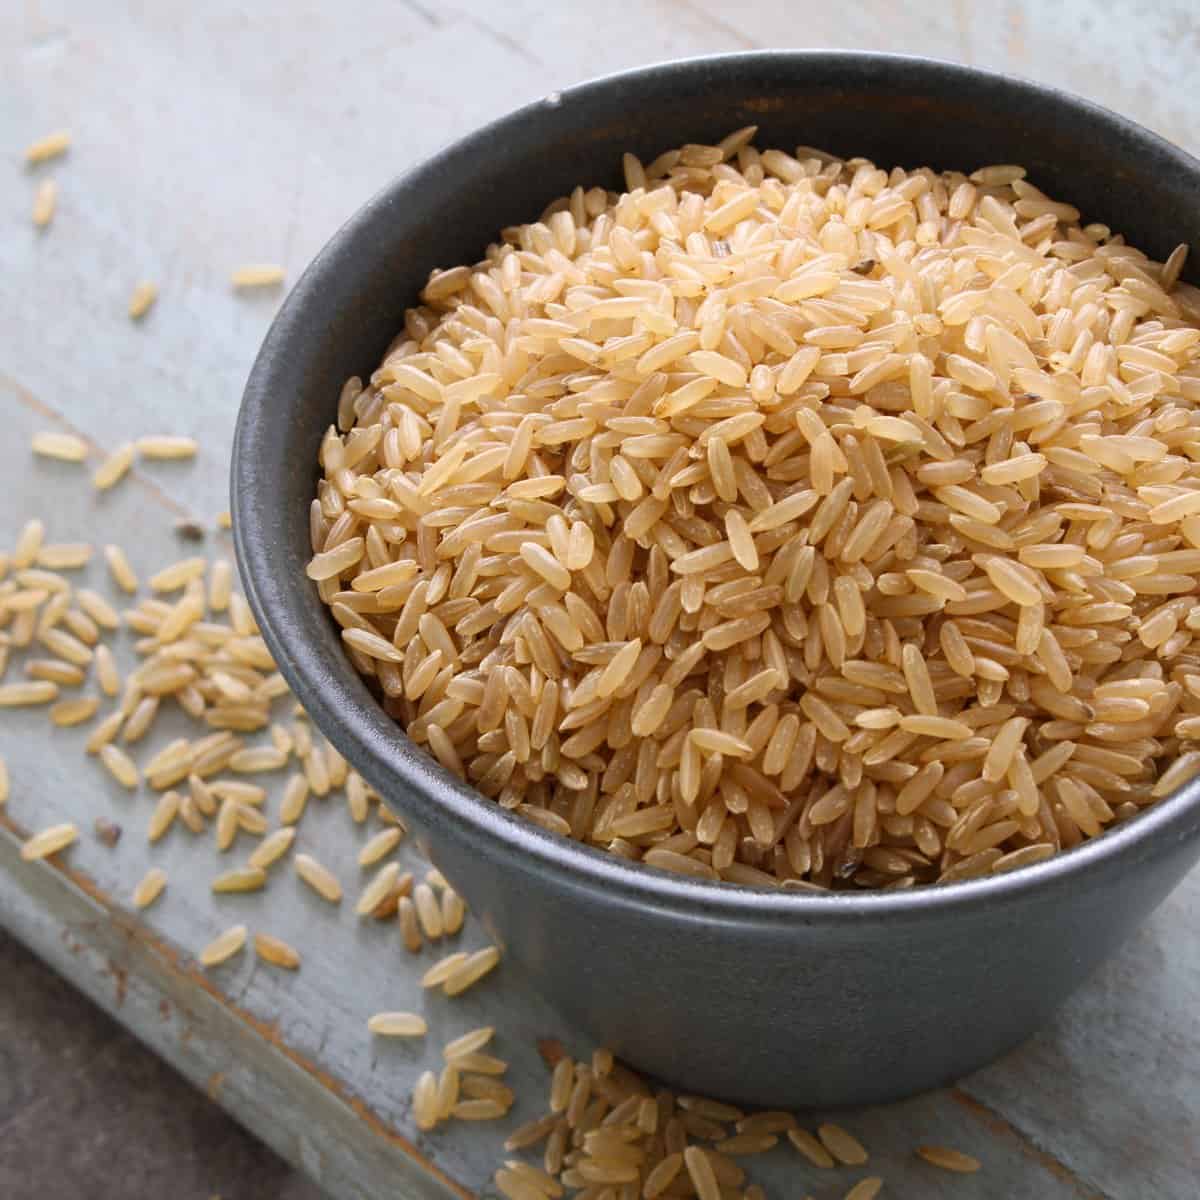 What is brown rice